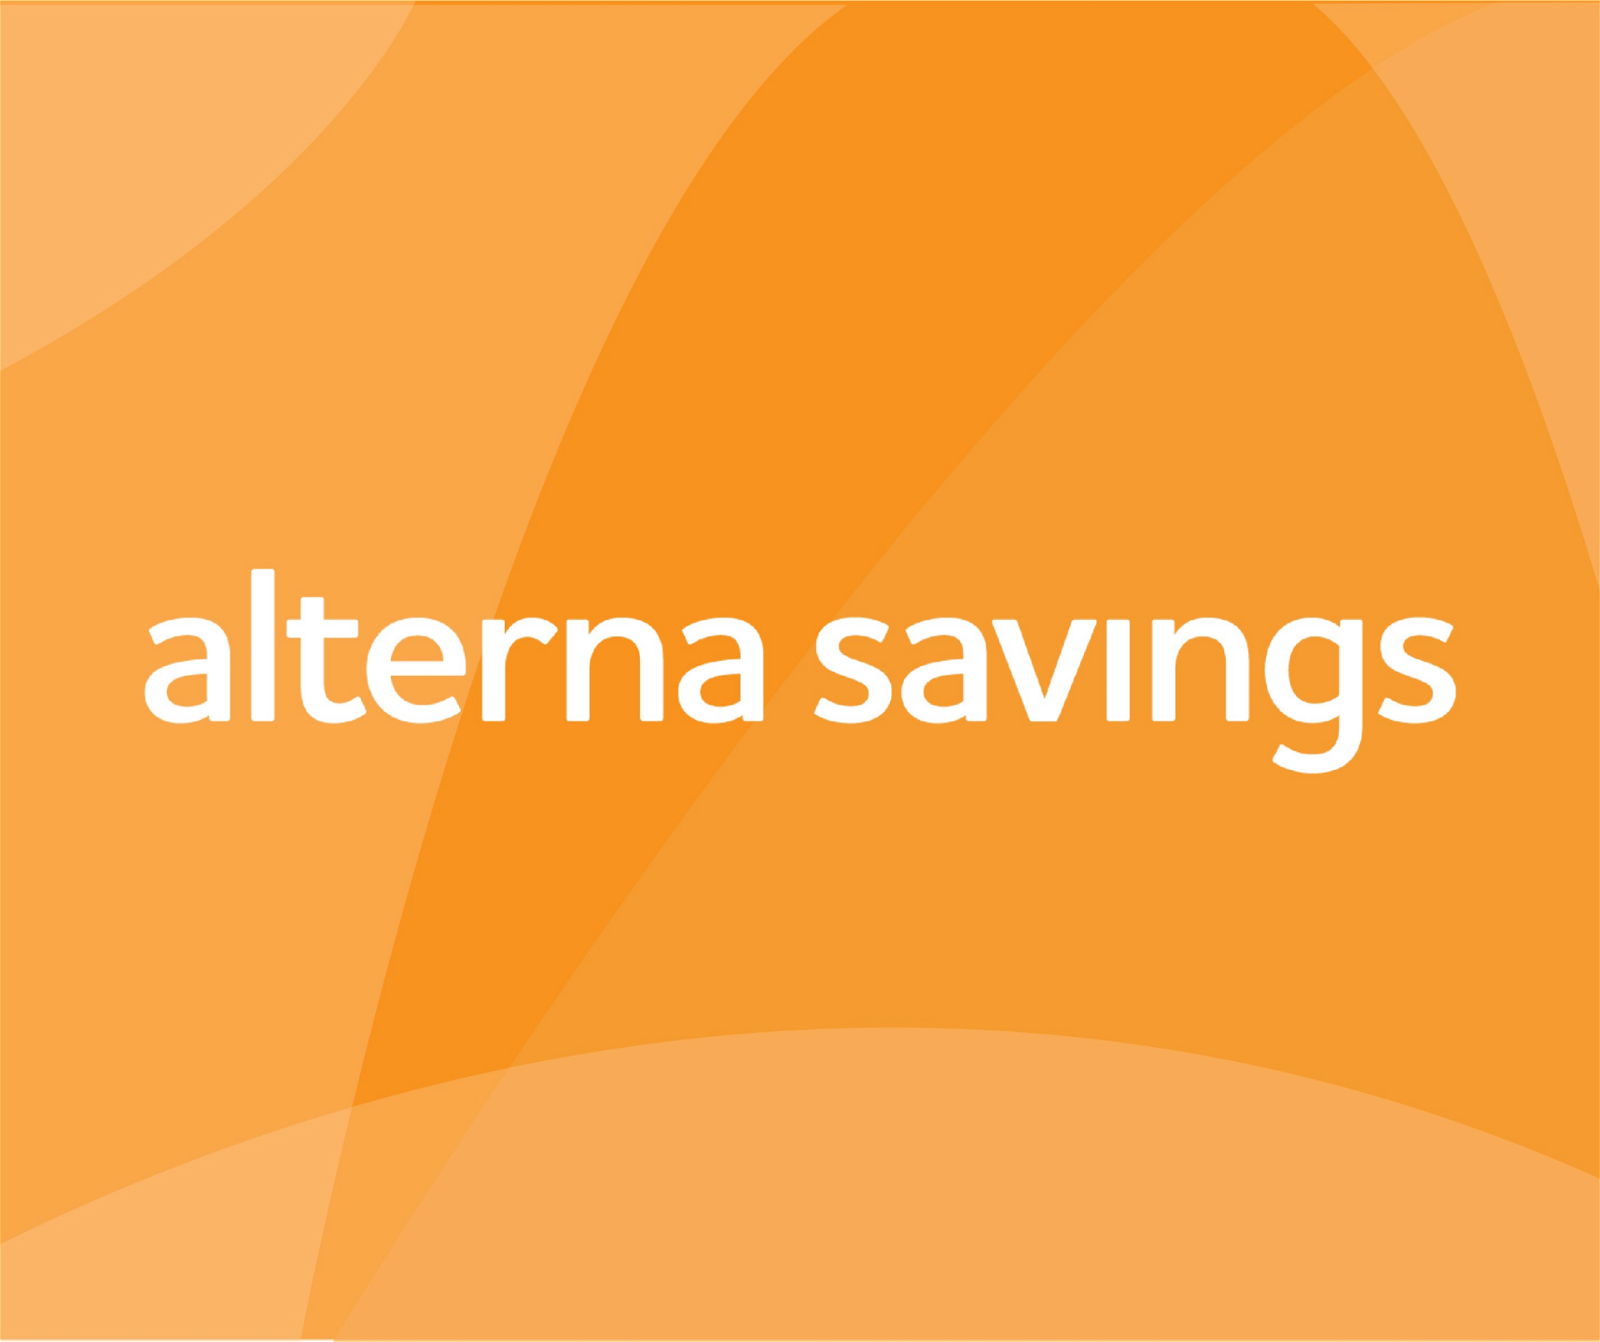 Alterna Savings and Credit Union Limited